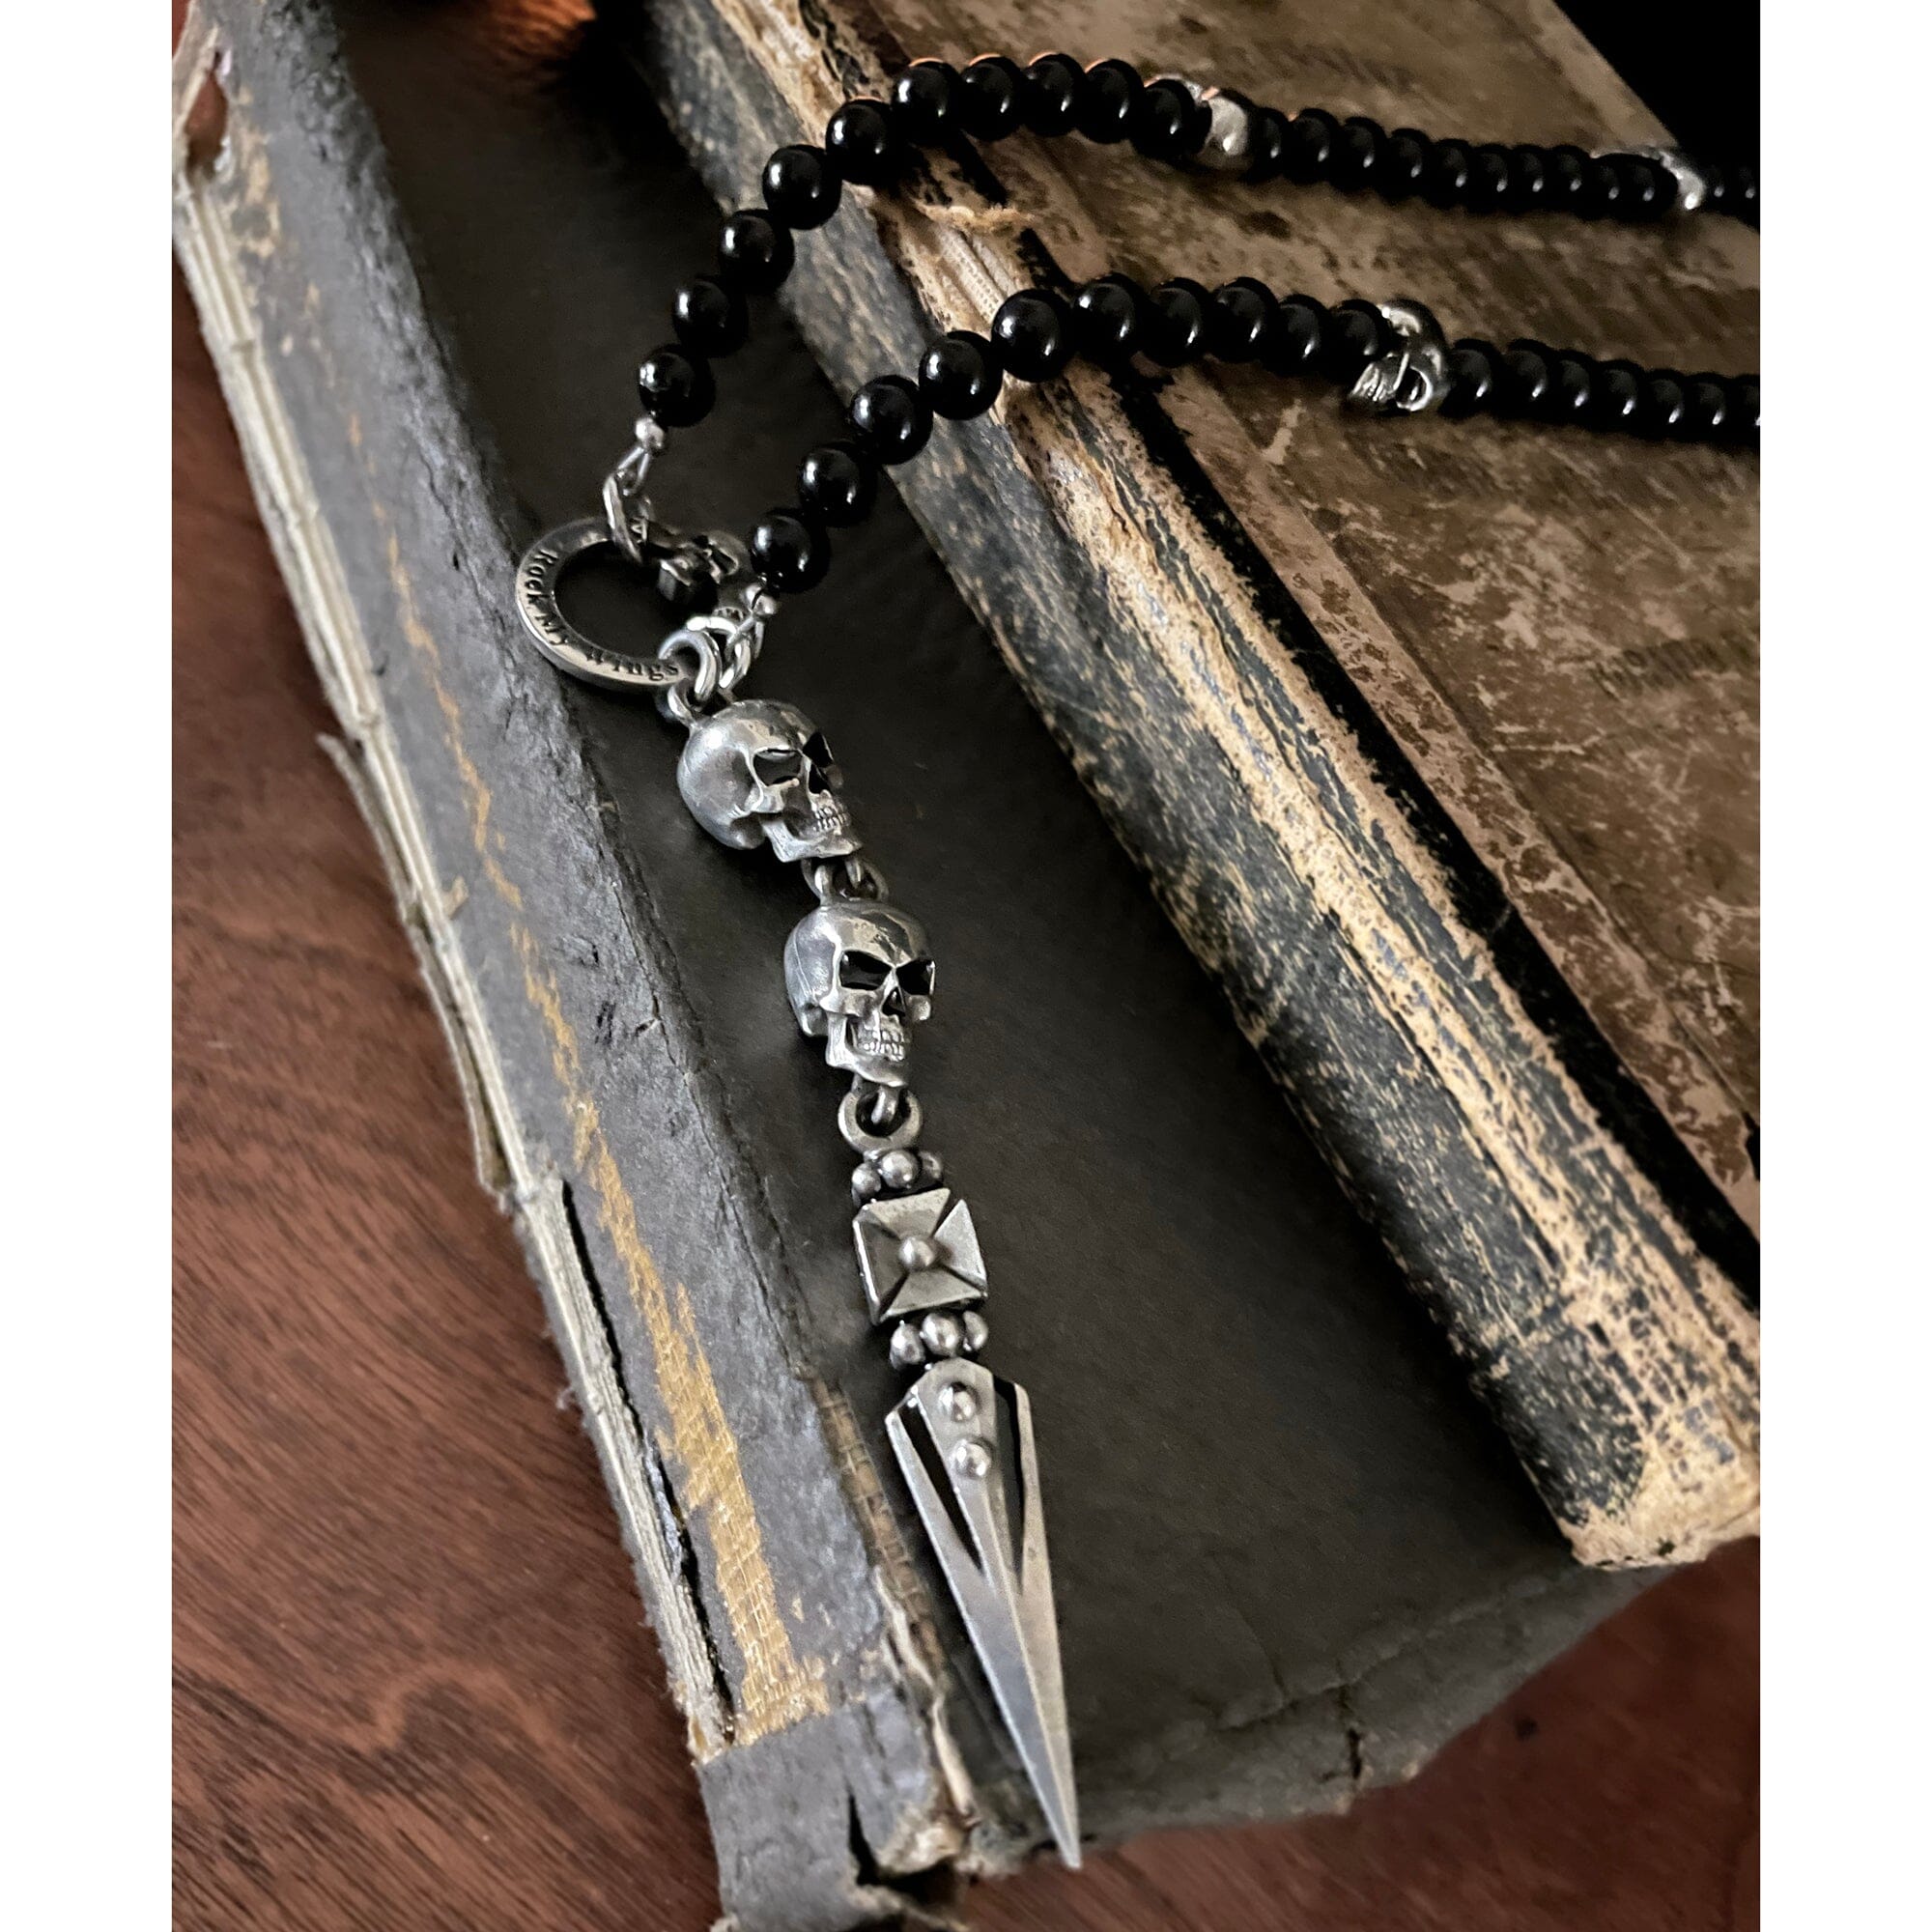 Skull and Dagger Rosary Necklace for Men with Onyx Beads. Handcrafted by Rock My Wings